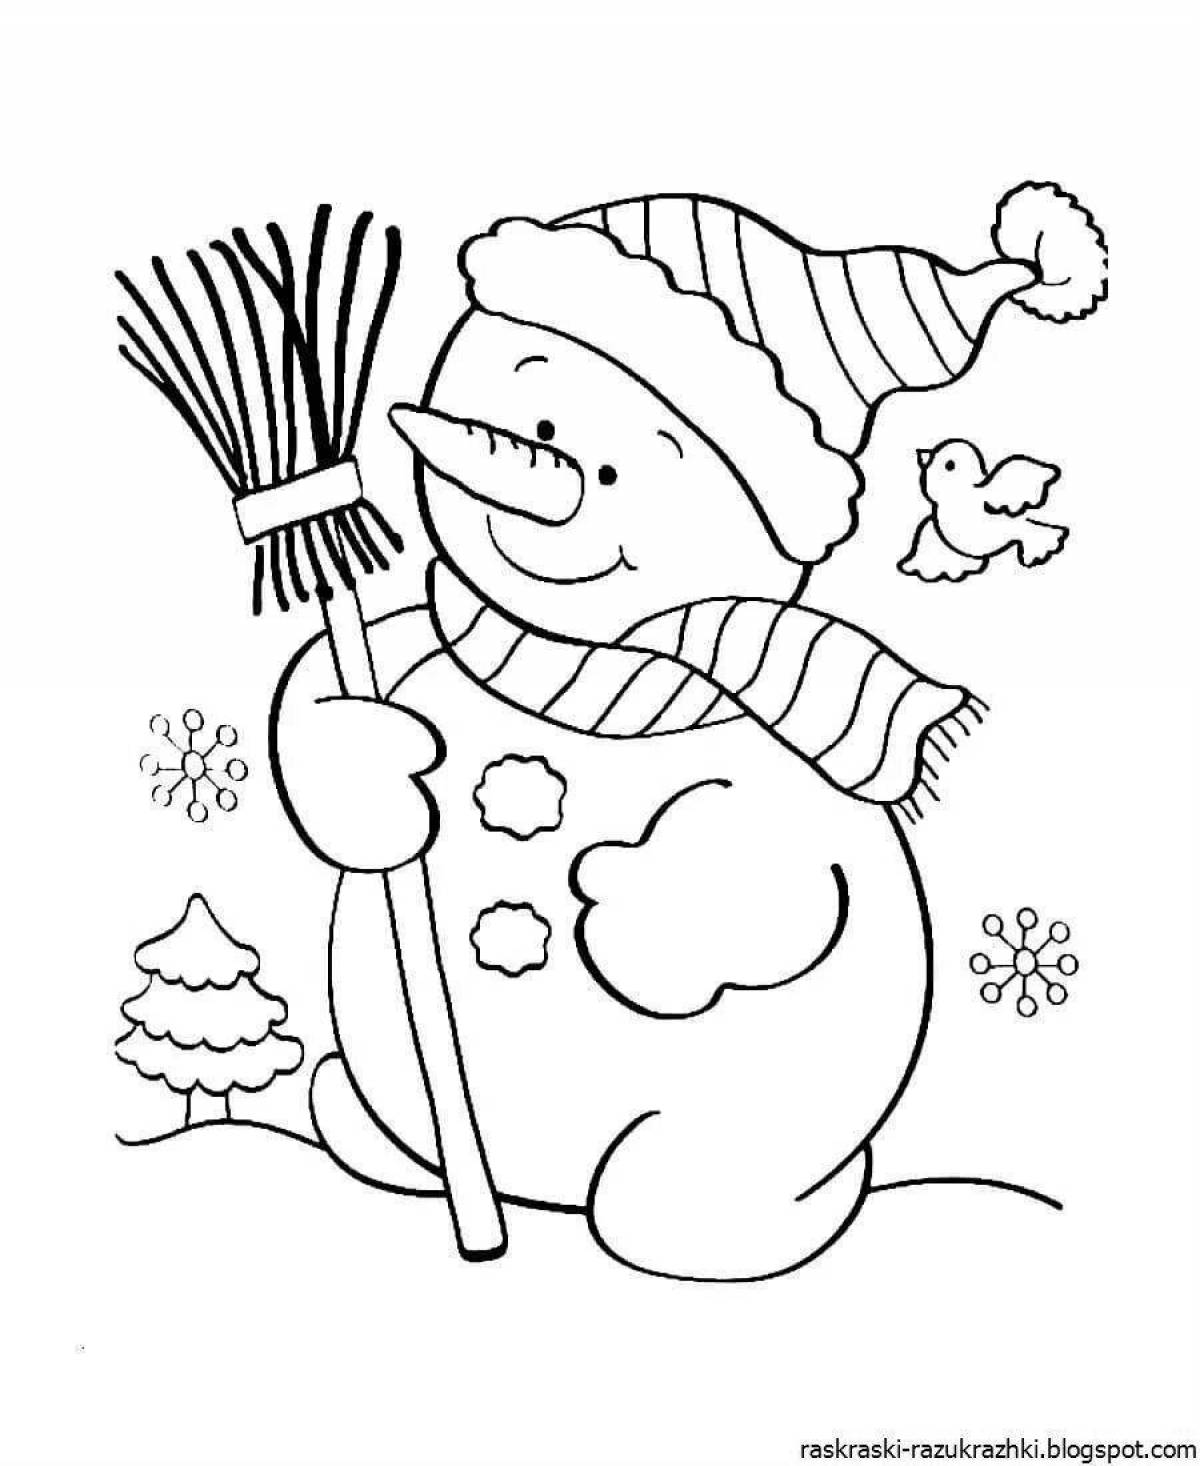 A fascinating snowman coloring book for children aged 5